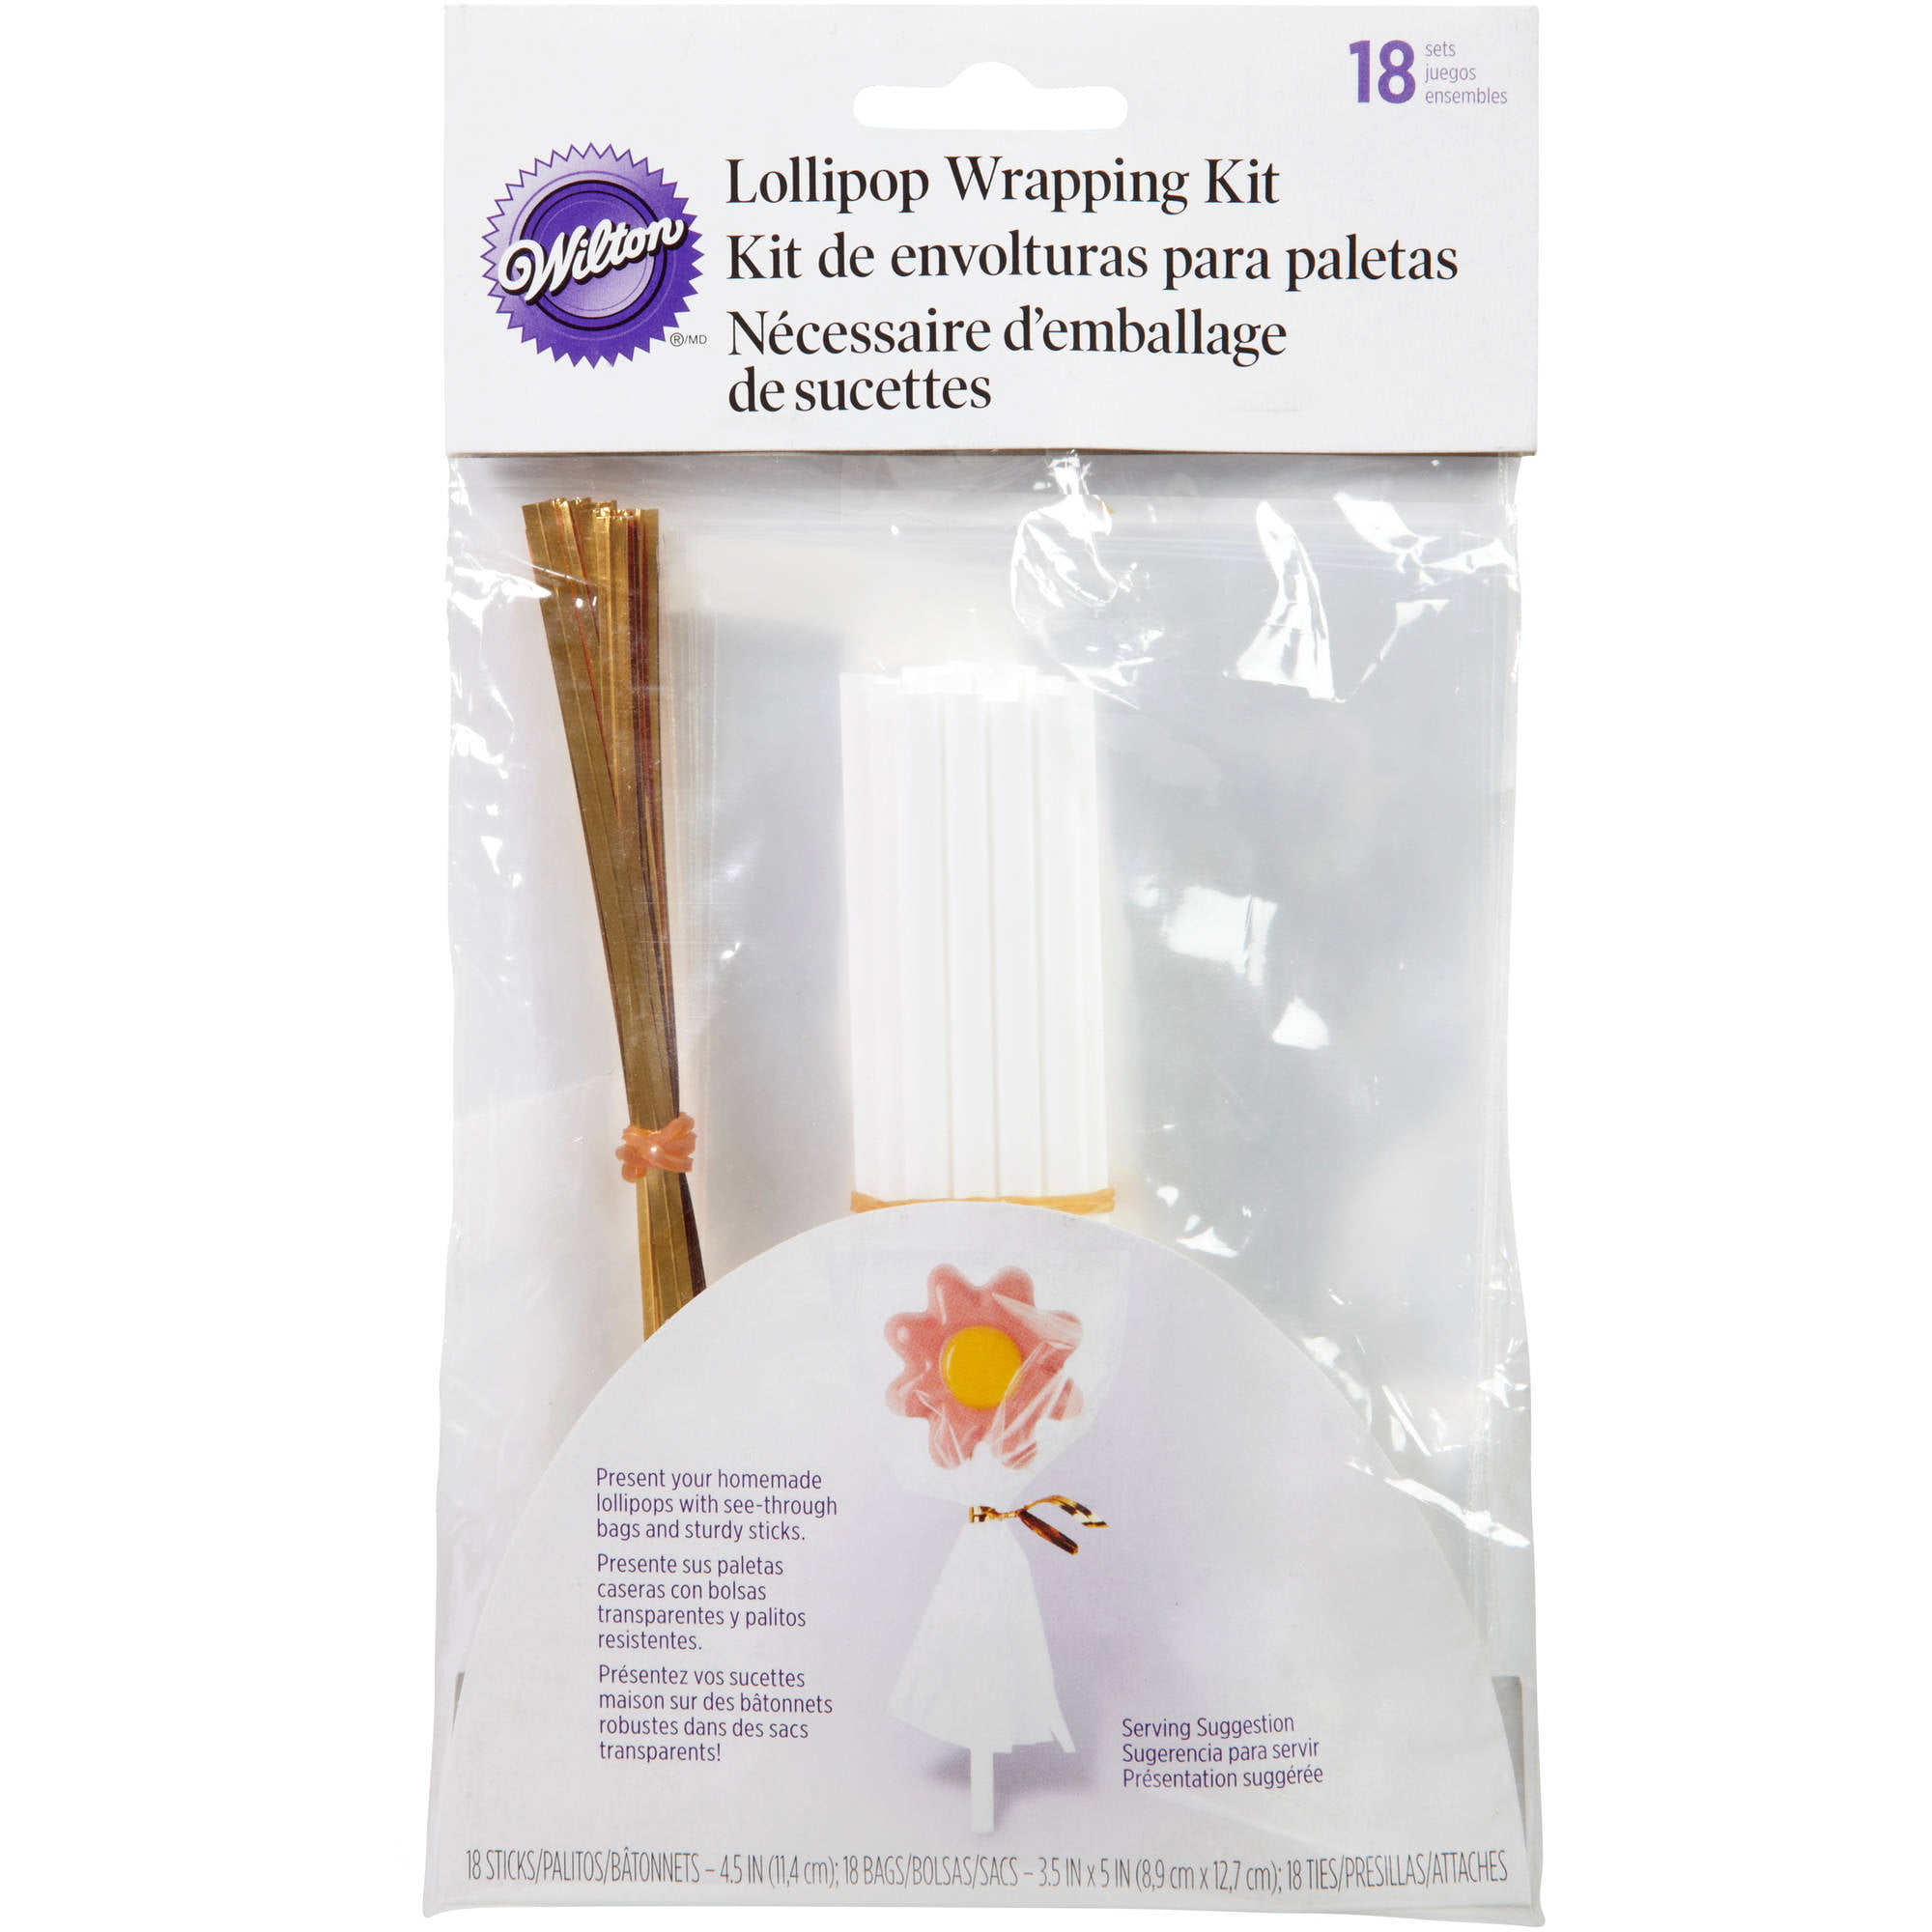 Lollipop Wrapping Kit Makes 18   070896191939 